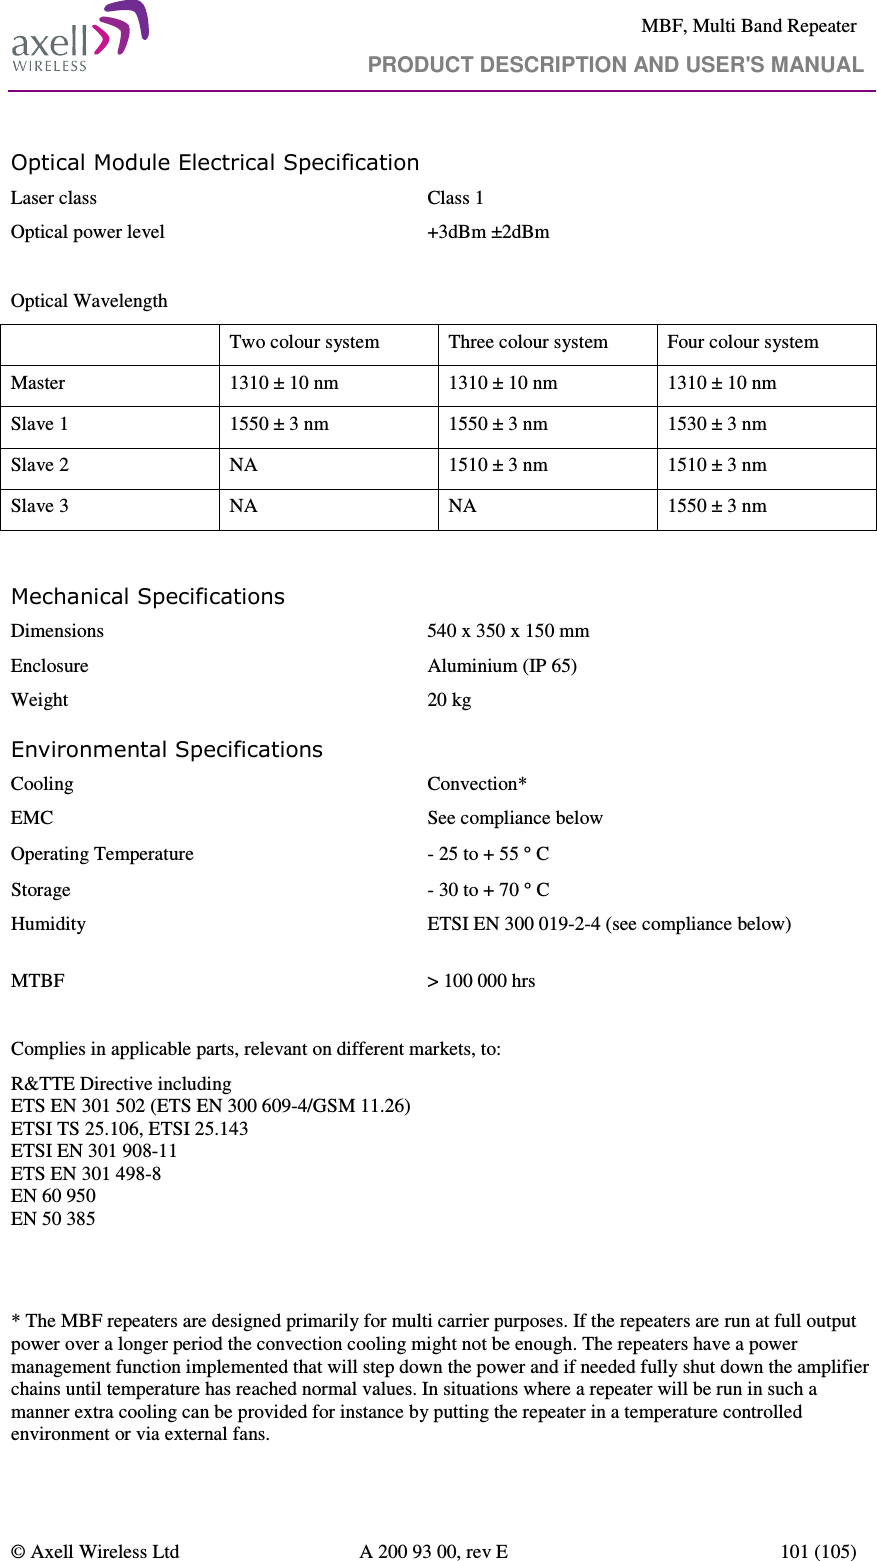     MBF, Multi Band Repeater                                     PRODUCT DESCRIPTION AND USER&apos;S MANUAL   © Axell Wireless Ltd  A 200 93 00, rev E  101 (105)  Optical Module Electrical Specification  Laser class  Class 1 Optical power level   +3dBm ±2dBm  Optical Wavelength   Two colour system  Three colour system  Four colour system Master  1310 ± 10 nm  1310 ± 10 nm  1310 ± 10 nm Slave 1  1550 ± 3 nm  1550 ± 3 nm  1530 ± 3 nm Slave 2  NA  1510 ± 3 nm  1510 ± 3 nm Slave 3  NA  NA  1550 ± 3 nm     Mechanical Specifications Dimensions   540 x 350 x 150 mm Enclosure  Aluminium (IP 65) Weight   20 kg Environmental Specifications Cooling  Convection* EMC   See compliance below  Operating Temperature  - 25 to + 55 ° C Storage   - 30 to + 70 ° C Humidity  ETSI EN 300 019-2-4 (see compliance below)      MTBF   &gt; 100 000 hrs  Complies in applicable parts, relevant on different markets, to: R&amp;TTE Directive including ETS EN 301 502 (ETS EN 300 609-4/GSM 11.26) ETSI TS 25.106, ETSI 25.143 ETSI EN 301 908-11 ETS EN 301 498-8 EN 60 950 EN 50 385      * The MBF repeaters are designed primarily for multi carrier purposes. If the repeaters are run at full output power over a longer period the convection cooling might not be enough. The repeaters have a power management function implemented that will step down the power and if needed fully shut down the amplifier chains until temperature has reached normal values. In situations where a repeater will be run in such a manner extra cooling can be provided for instance by putting the repeater in a temperature controlled environment or via external fans.   